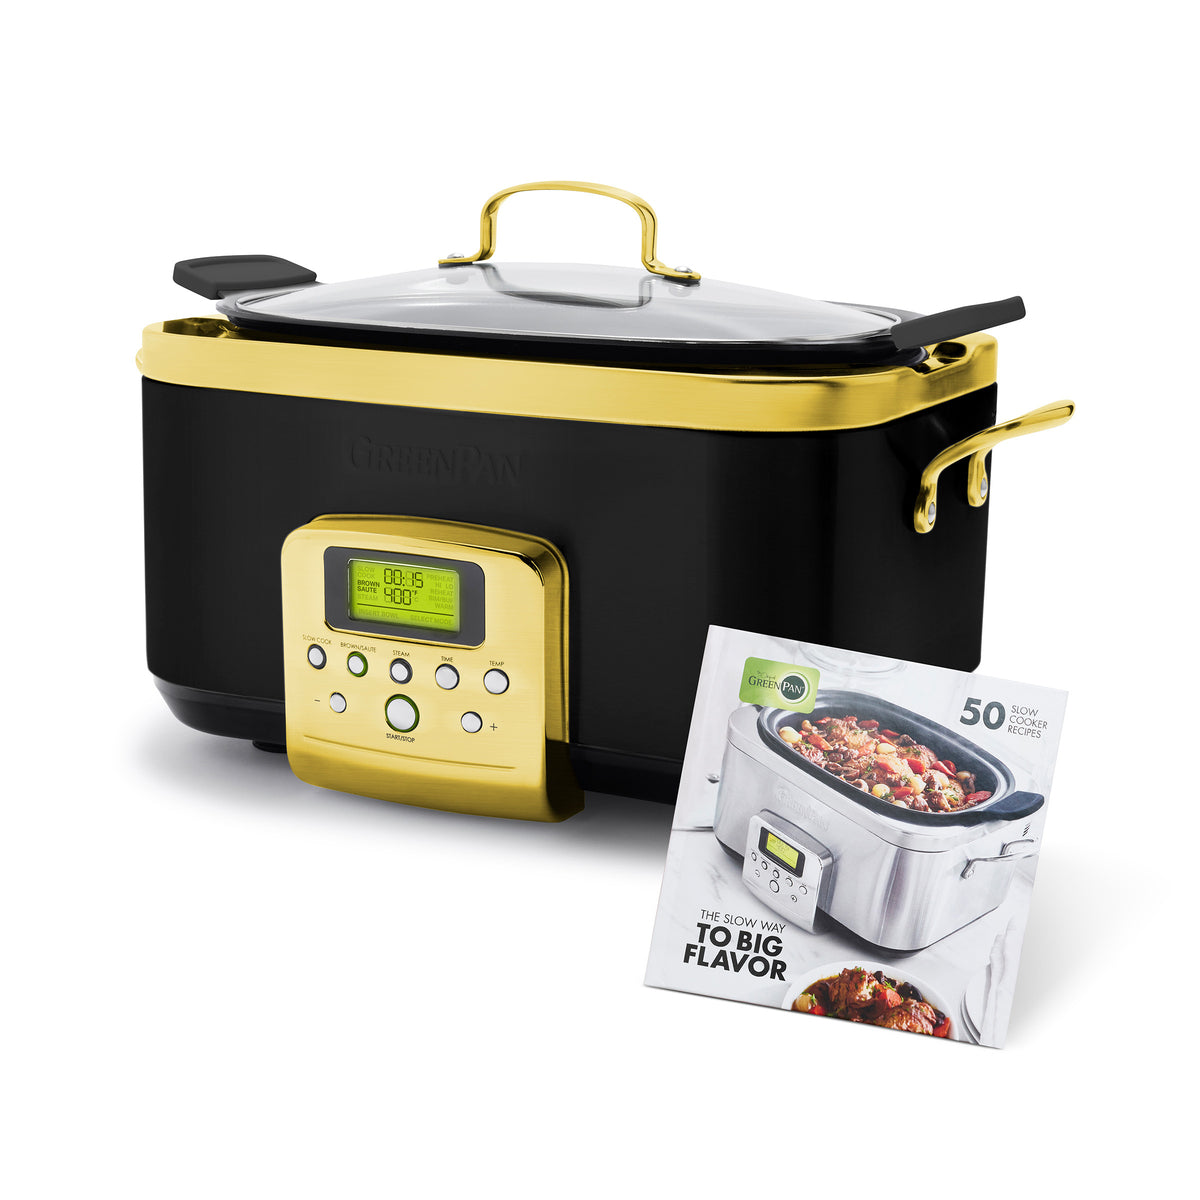 Crock-Pot Cook and Carry Green Bay Packers 6-Qt. Slow Cooker Green/Yellow  SCCPNFL600-GB - Best Buy